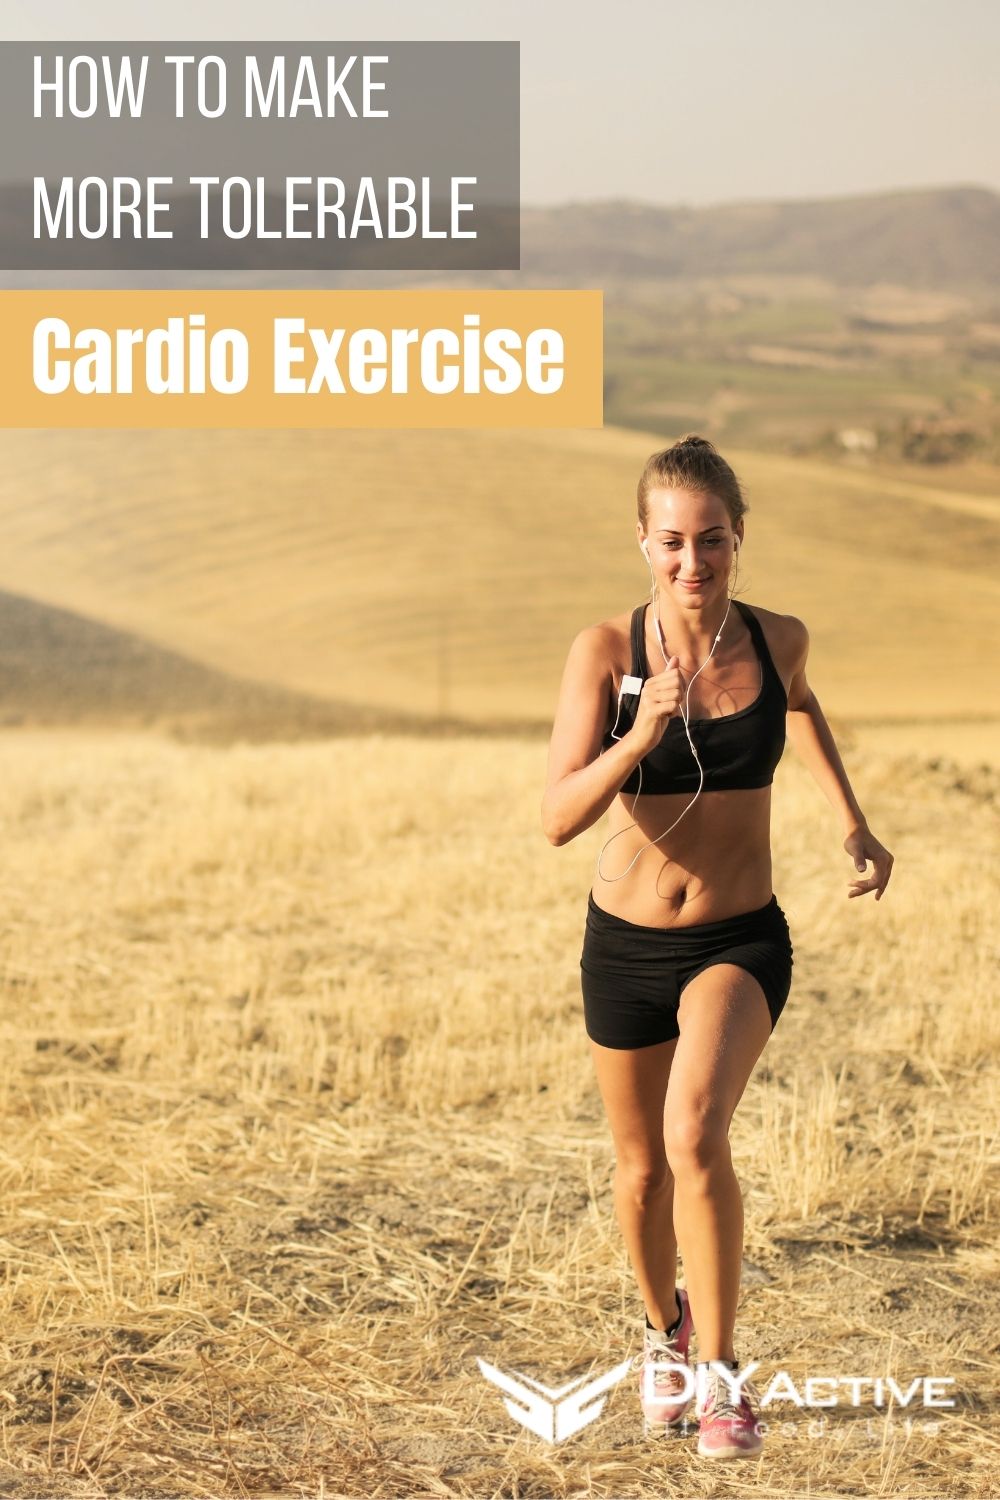 How To Make Cardio More Tolerable If You Can&rsquo;t Stand It 2